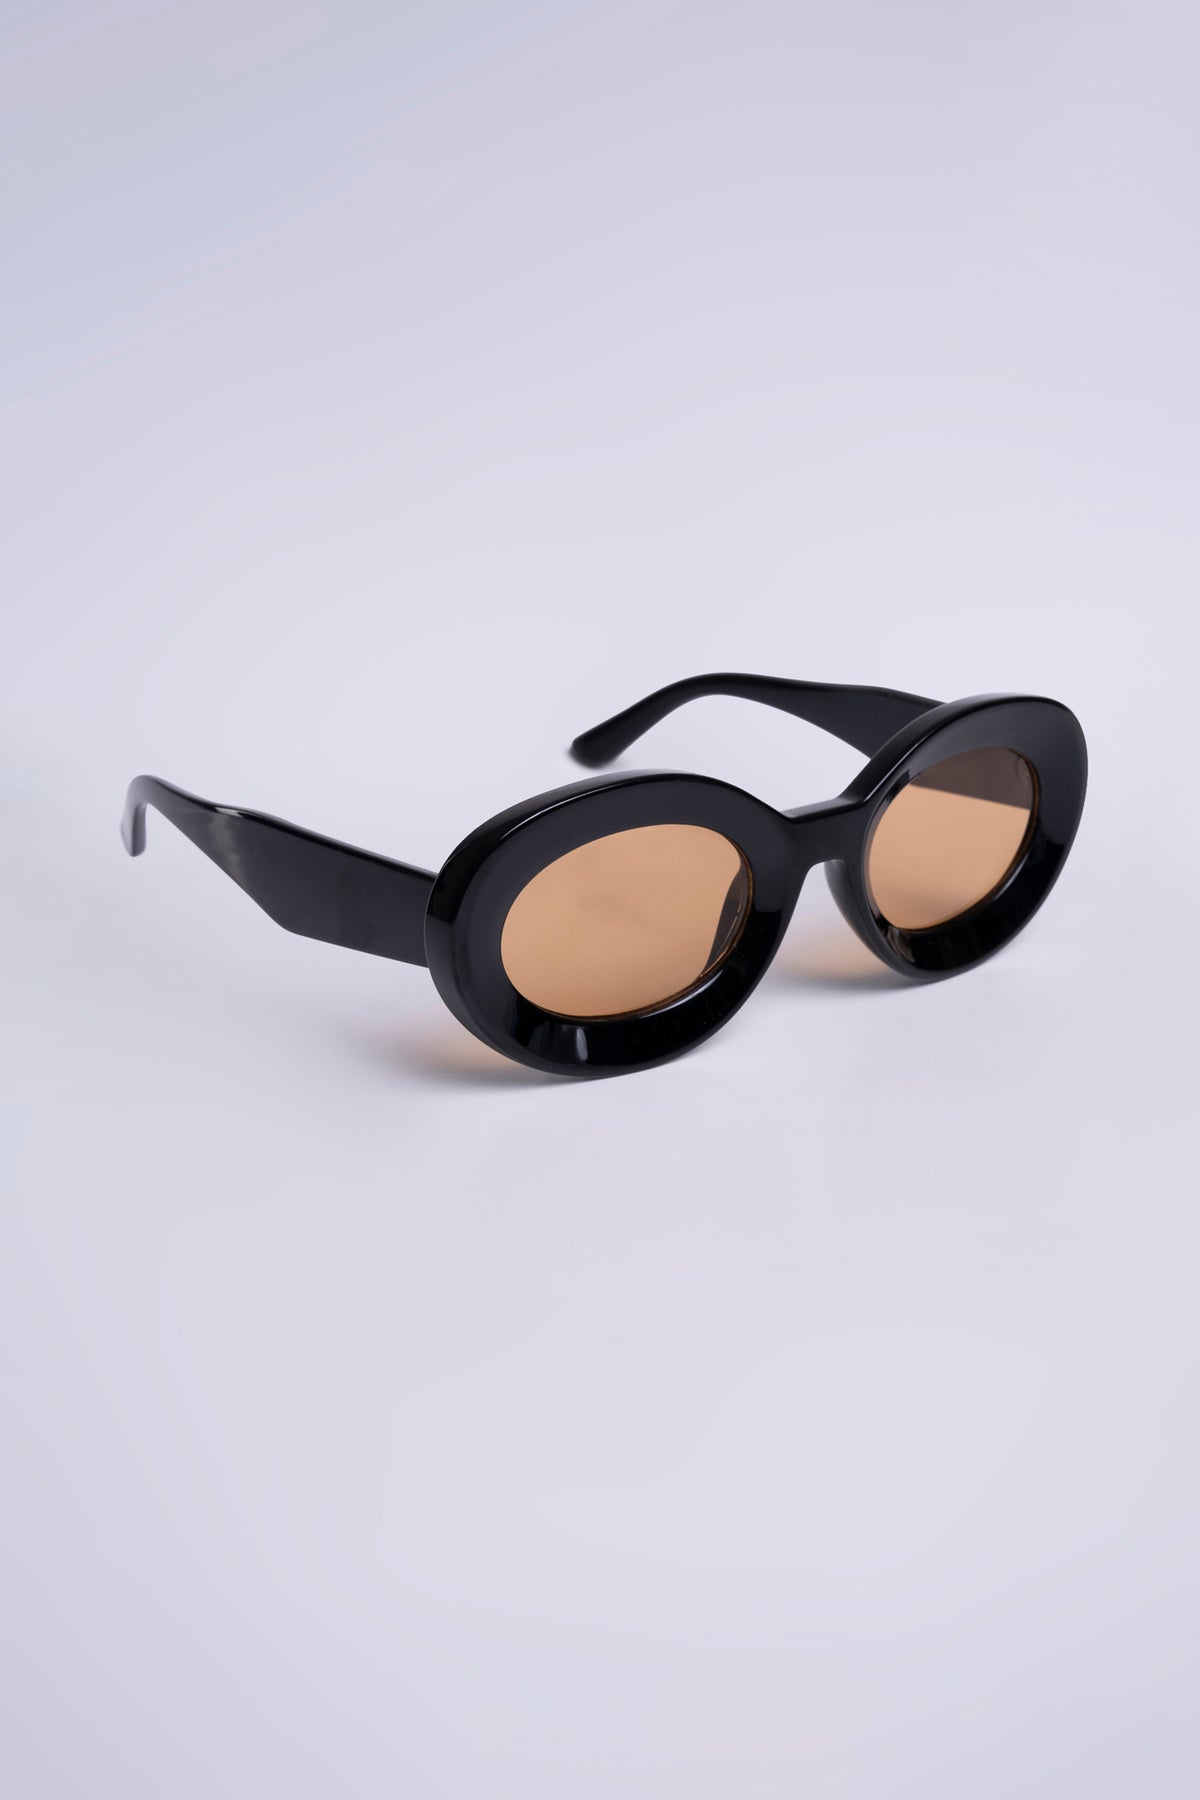 
              See You Out Retro Rounded Sunglasses - Black/Brown - Swank A Posh
            